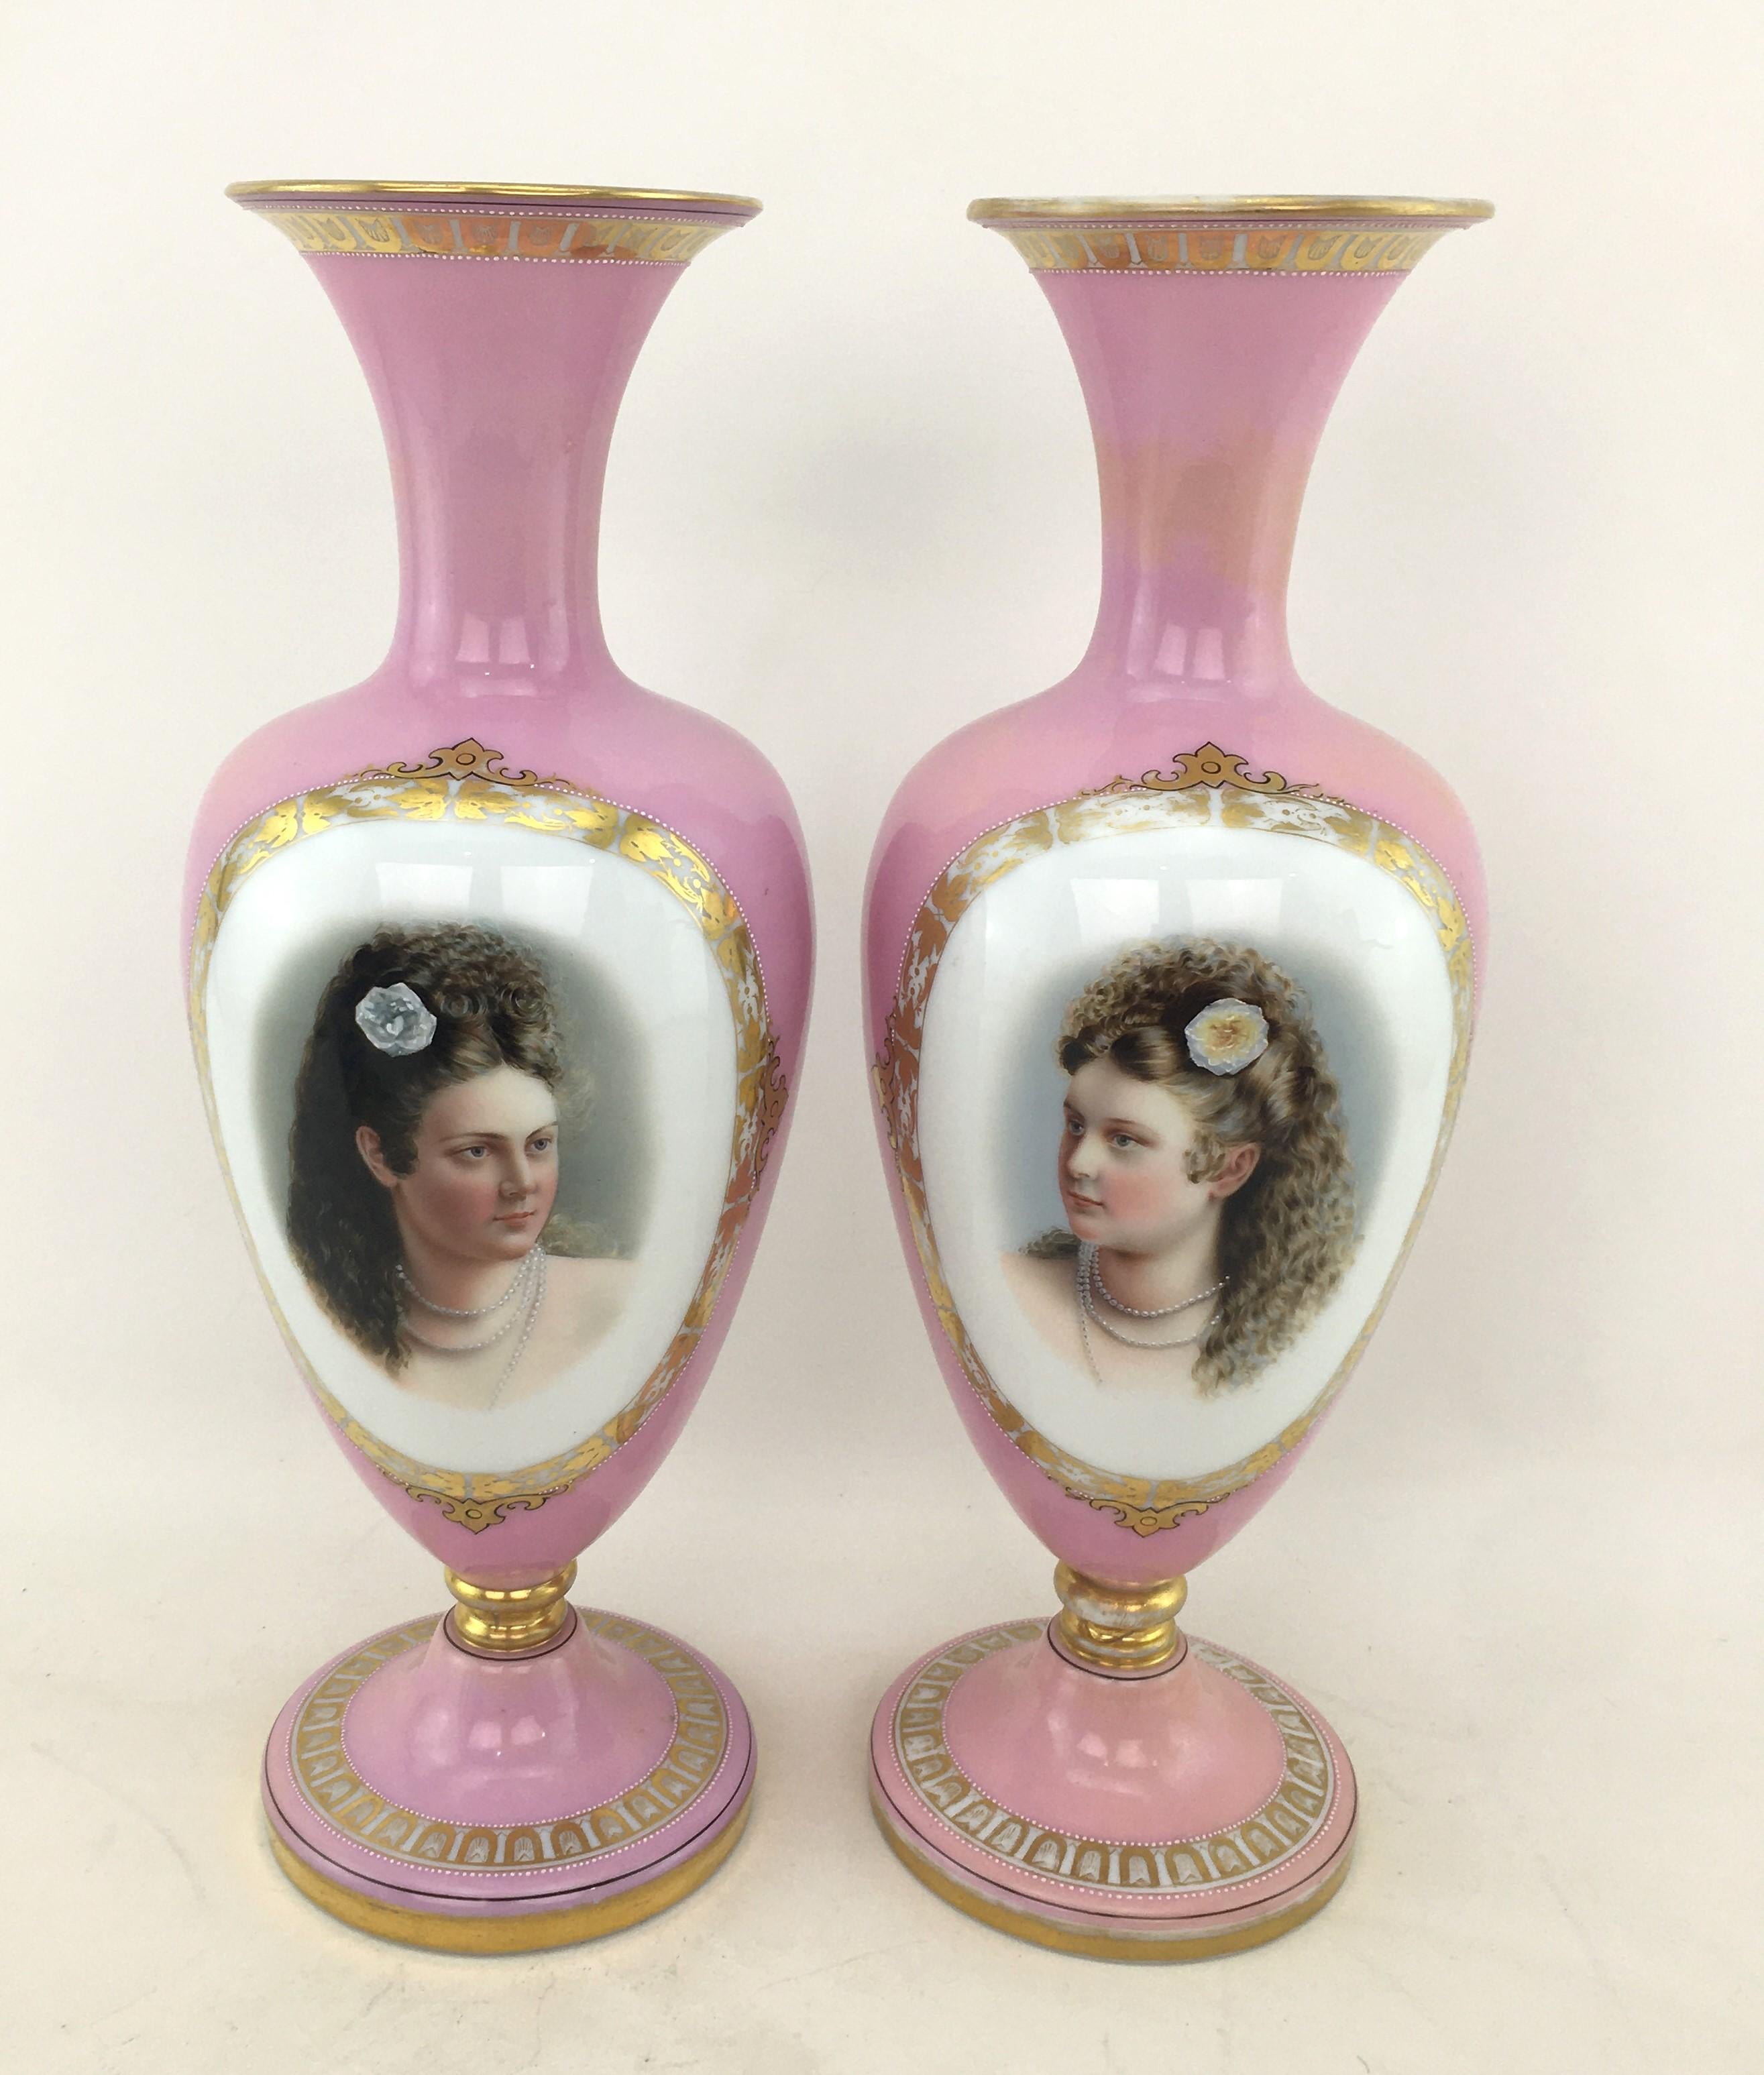 This pair of antique vases are unsigned, but presumed to have originated from Austria and date to approximately 1900 and done in the Victorian style. The vases are composed of cased glass with pink over white with a lustre overglaze and feature a